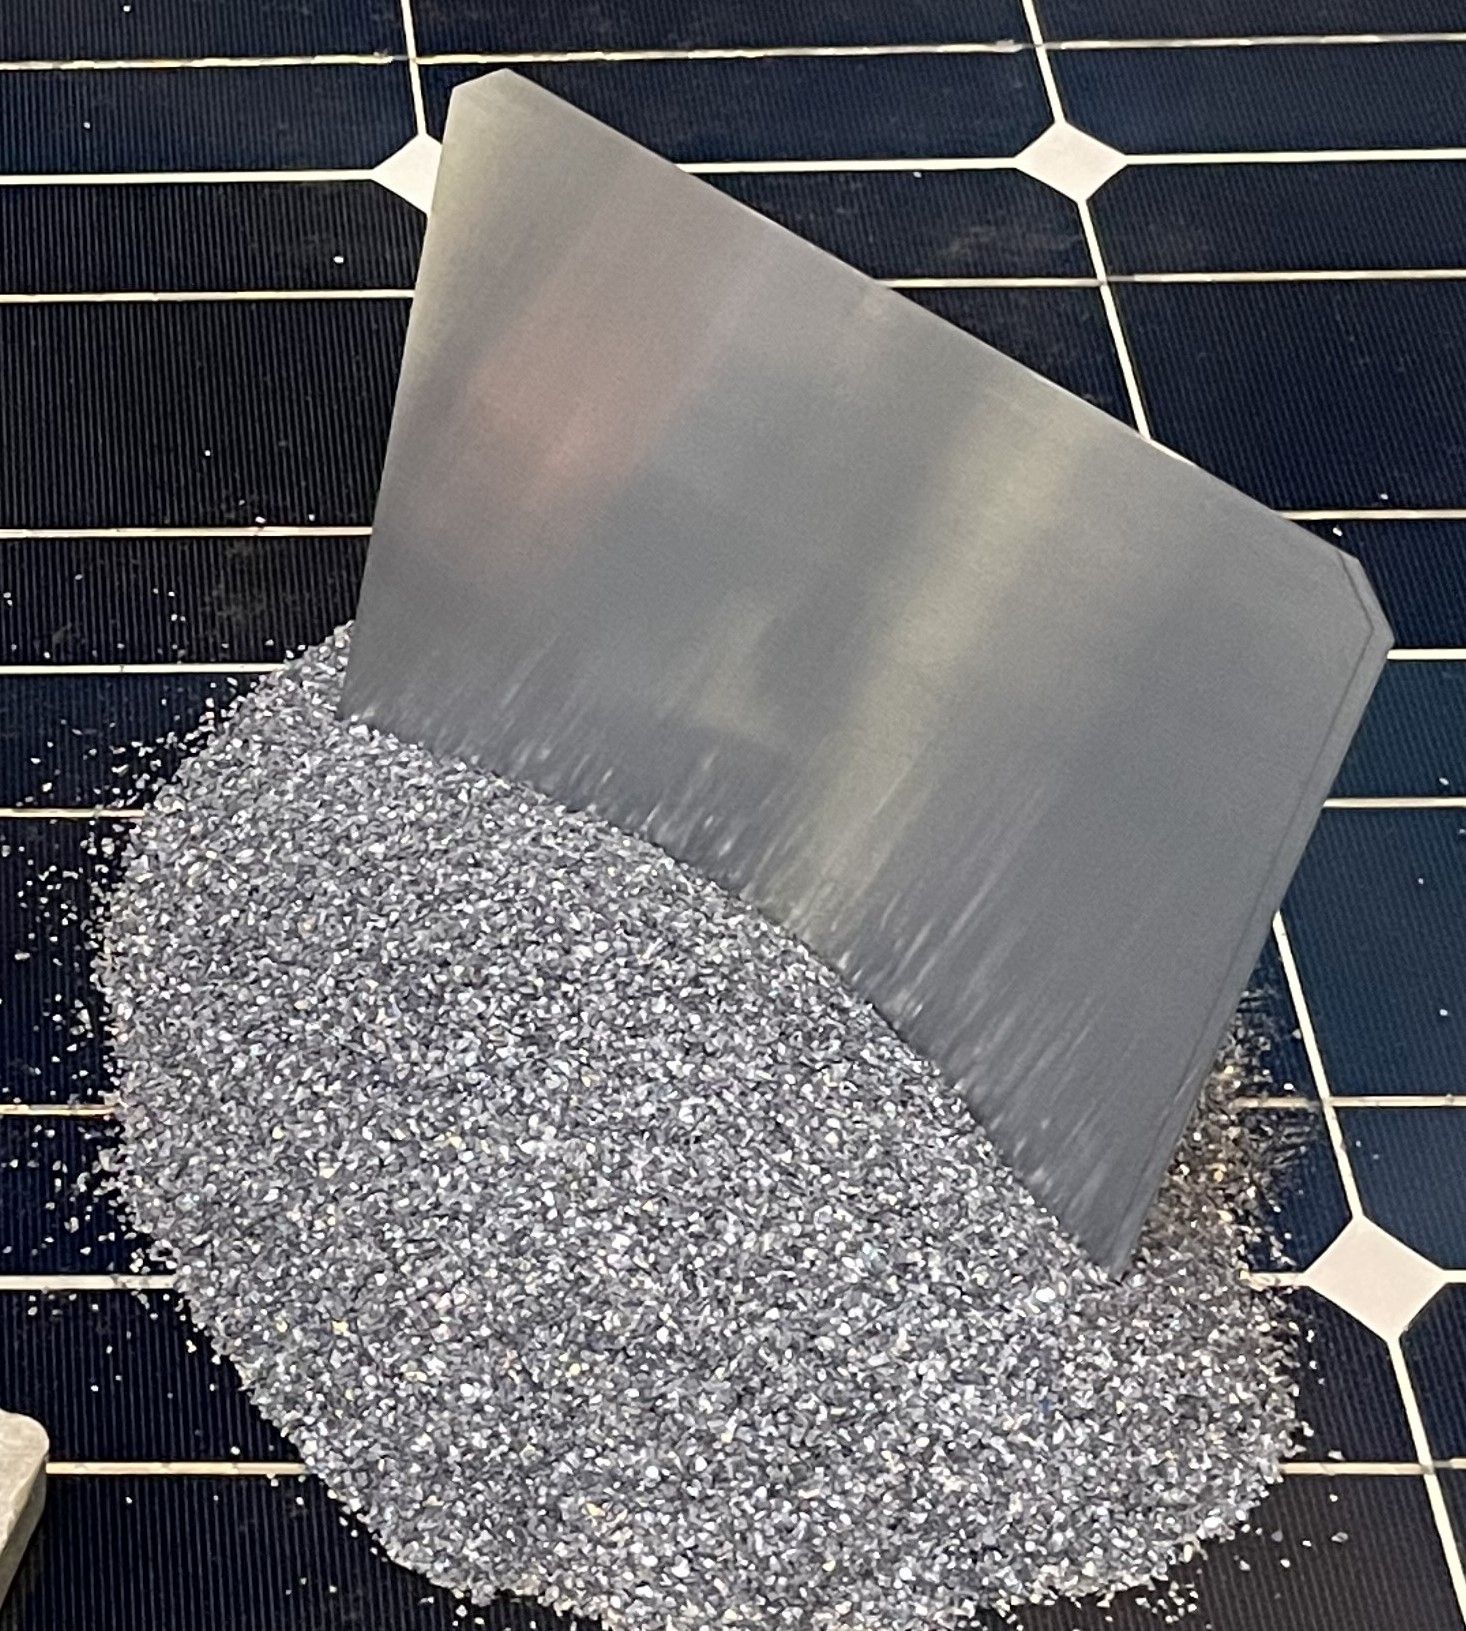 Purified silicon and wafers made from 100% recycled silicon